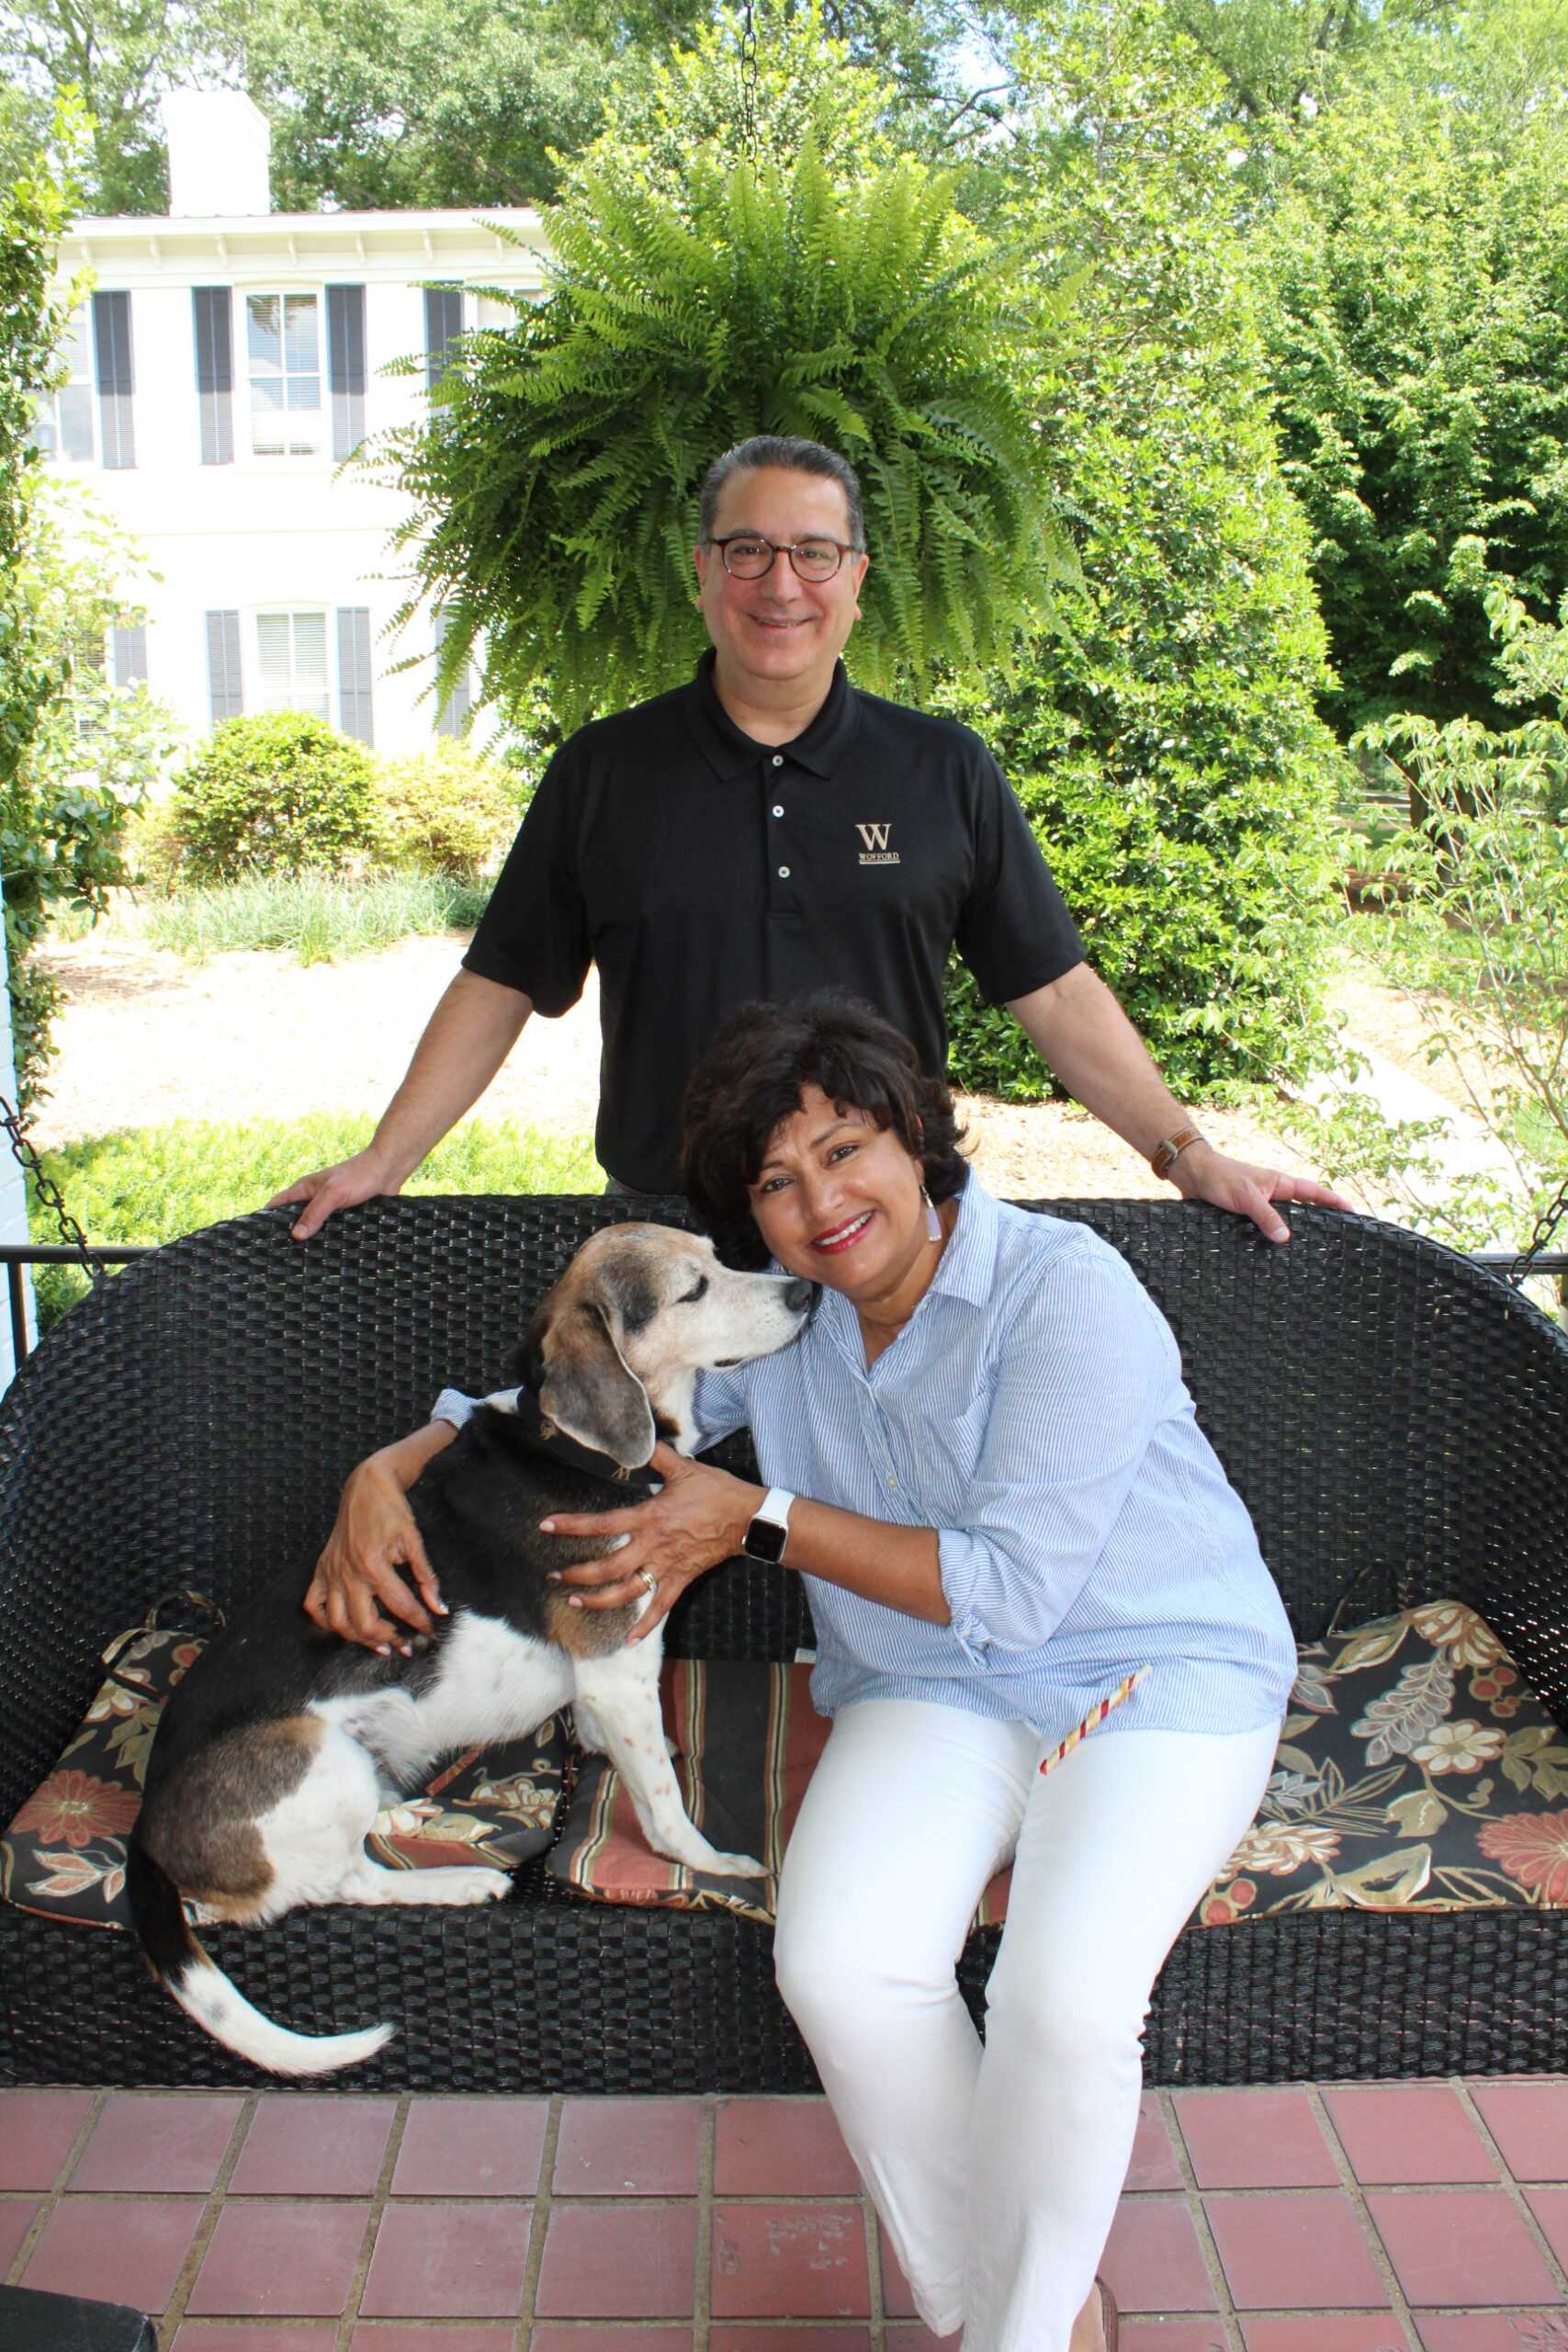 Photo by Addie Porter - President Nayef Samhat and Prima Samhat on their porch with their beloved dog, Ava. This year marks the Samhats 10th year at Wofford College.